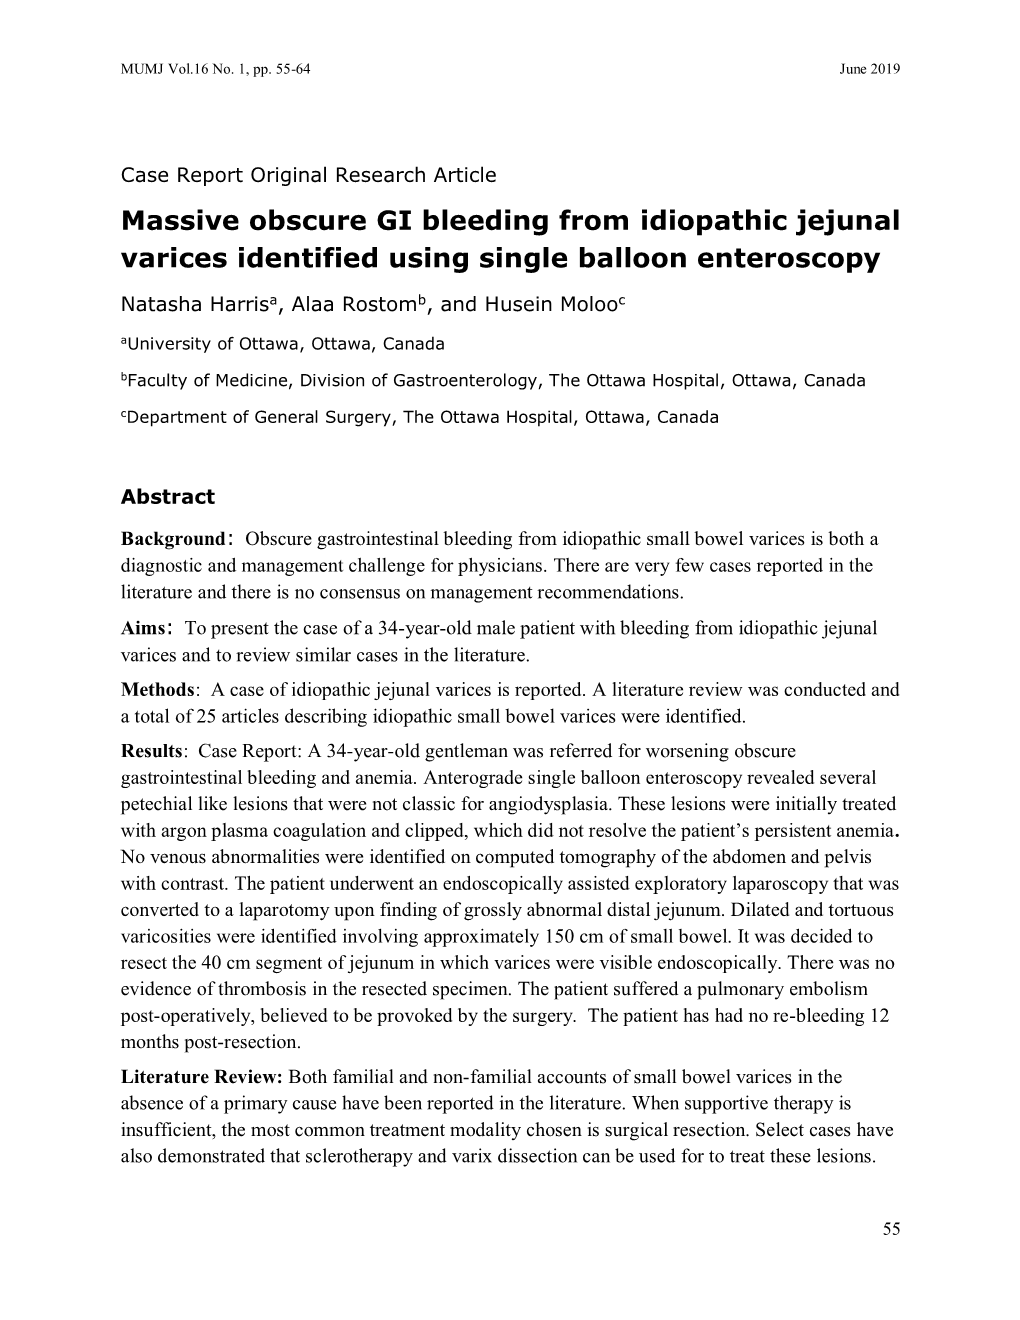 Massive Obscure GI Bleeding from Idiopathic Jejunal Varices Identified Using Single Balloon Enteroscopy